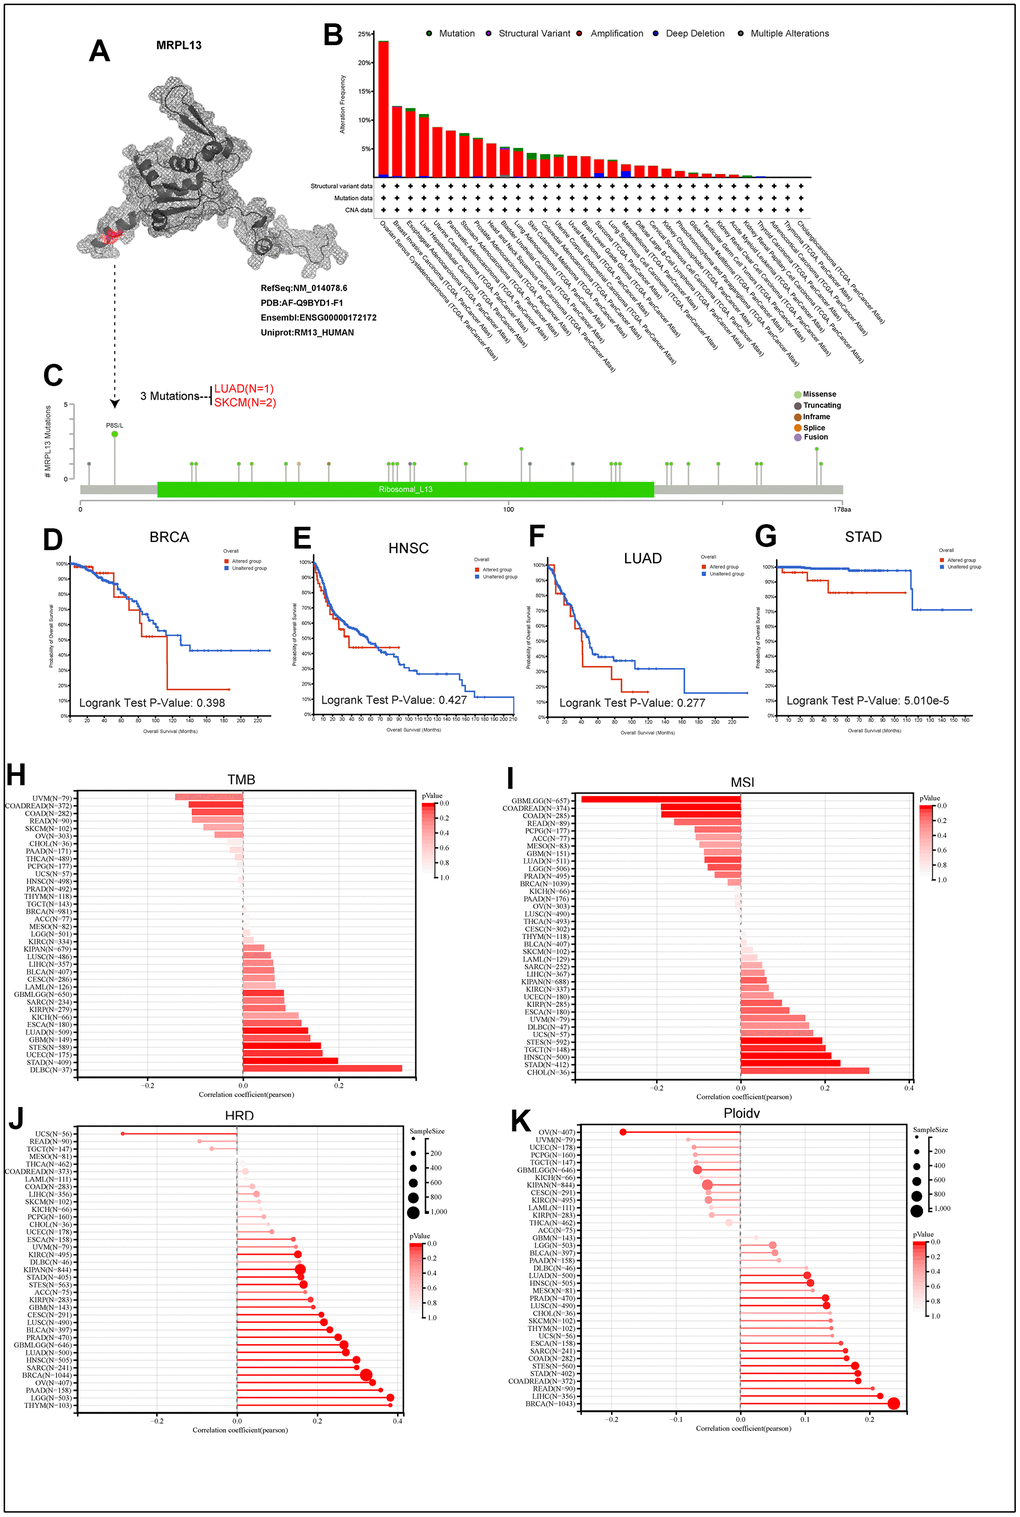 The genetic alterations of MRPL13. (A) The protein structure of MRPL13. (B) Analysis of MRPL13 alteration frequency in different tumor types according to cBioPortal dataset. (C) The mutation types, number, and sites of MRPL13 in pan-cancer analysis according to cBioPortal dataset. (D–G) Relationship between MRPL13 mutation status and overall survival in BRCA, LUAD, HNSC and STAD. (H–K) The association of TMB, MSI, HRD, PLOIDY with MRPL13 in pan-cancer.